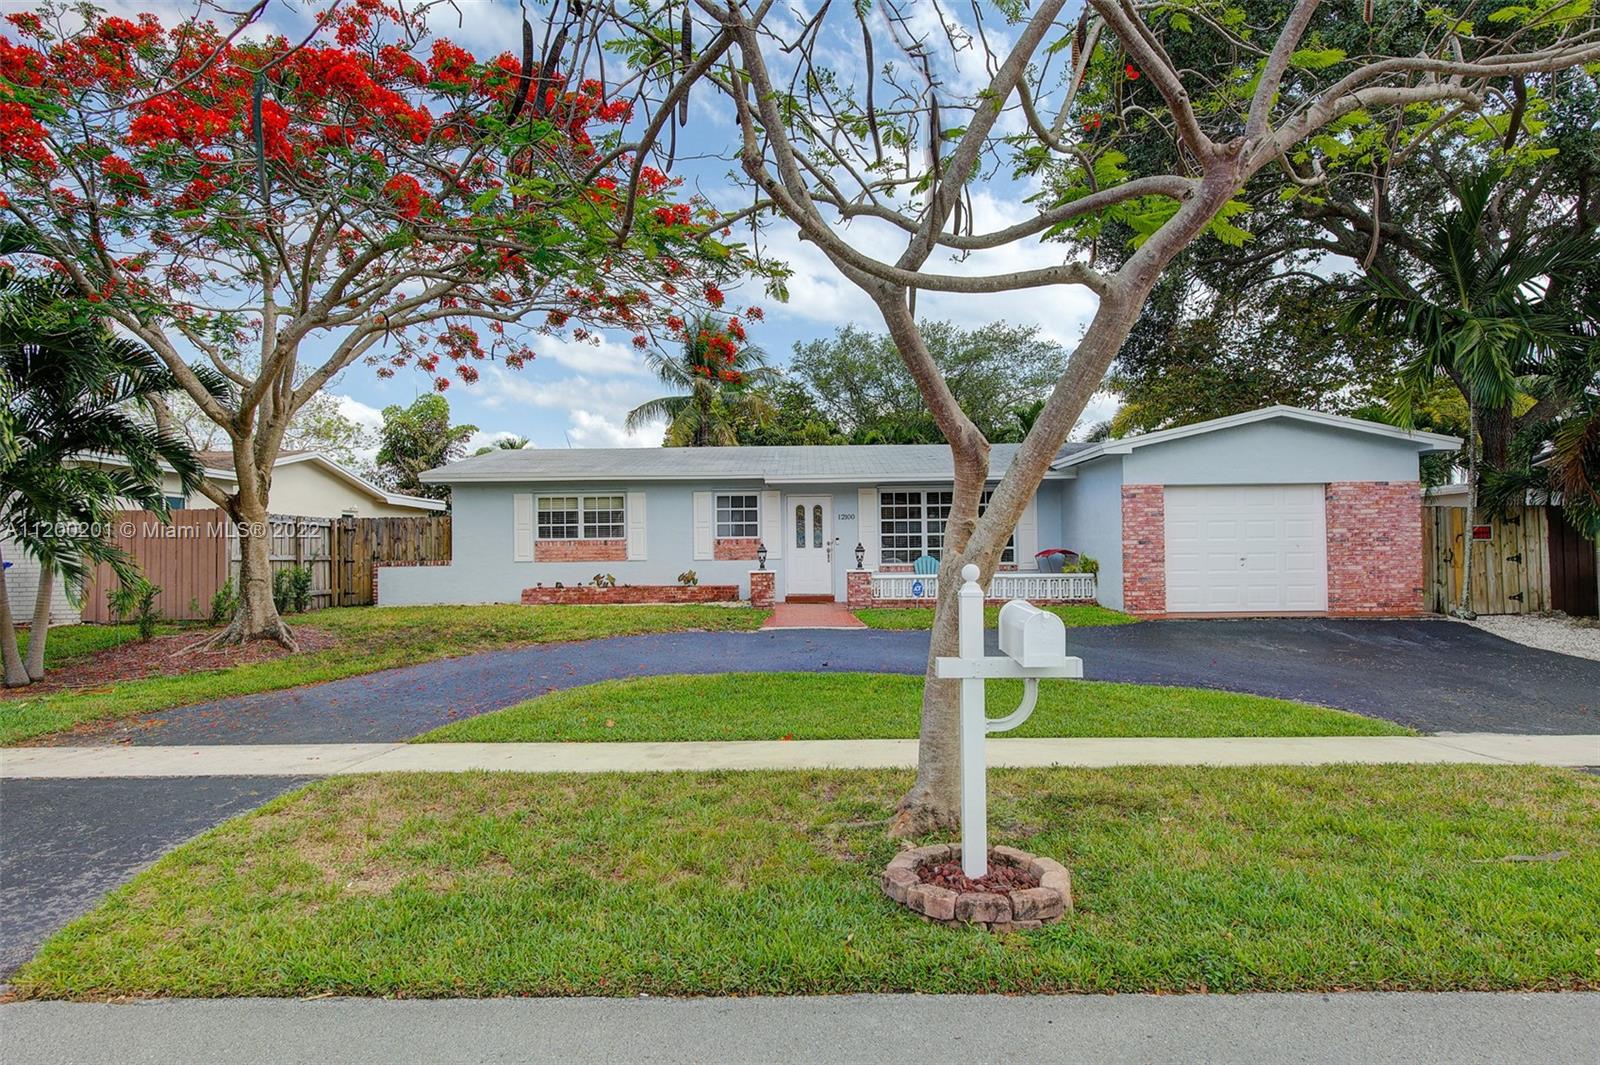 Ready for new owners in the oh-so desirable Pembroke Lakes! Tons of natural light throughout the home with many upgrades including kitchen and bathroom.  Home has three bedrooms and two full baths, with garage currently being used as a fourth bedroom.  Highlights include gas water heater, gas dryer and roof under five years old.  Awesome backyard features covered patio and ample room for a pool.  You can have side access to backyard for an RV/Boat/UTV with an easy adjustment. No HOA! Home is move-in ready!